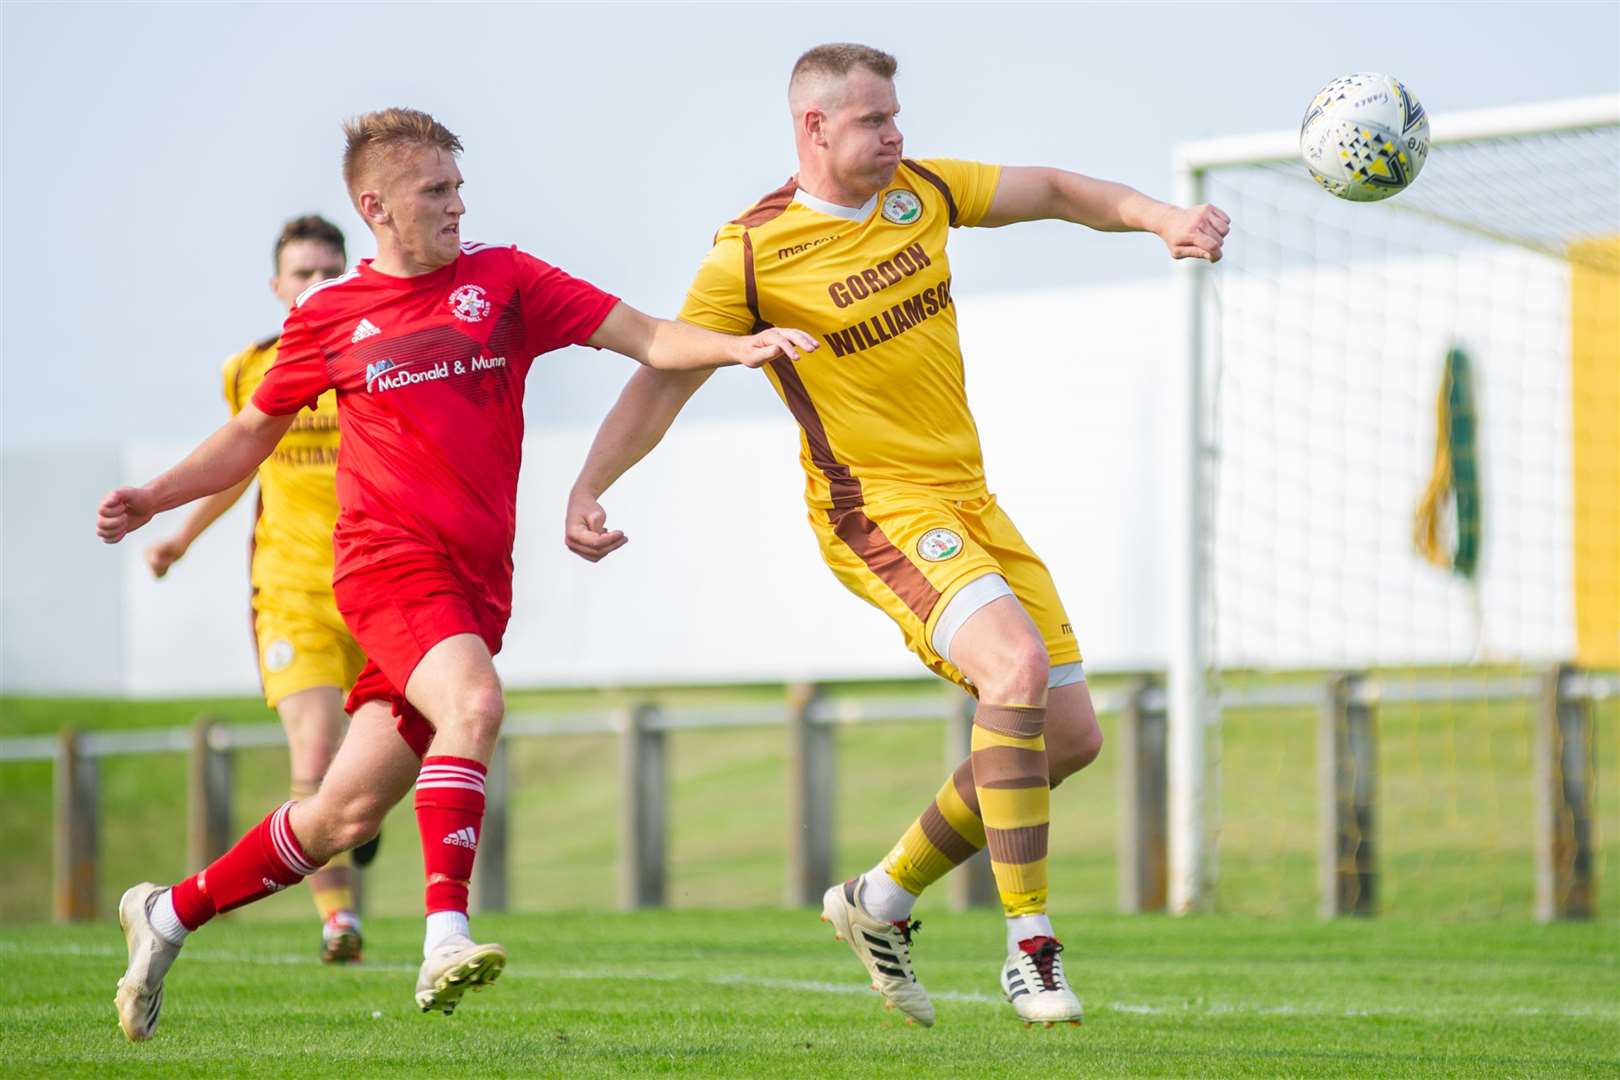 Ryan Sewell had caught the eye with his midfield displays for Lossiemouth - now he is moving to Huntly. Picture: Daniel Forsyth..